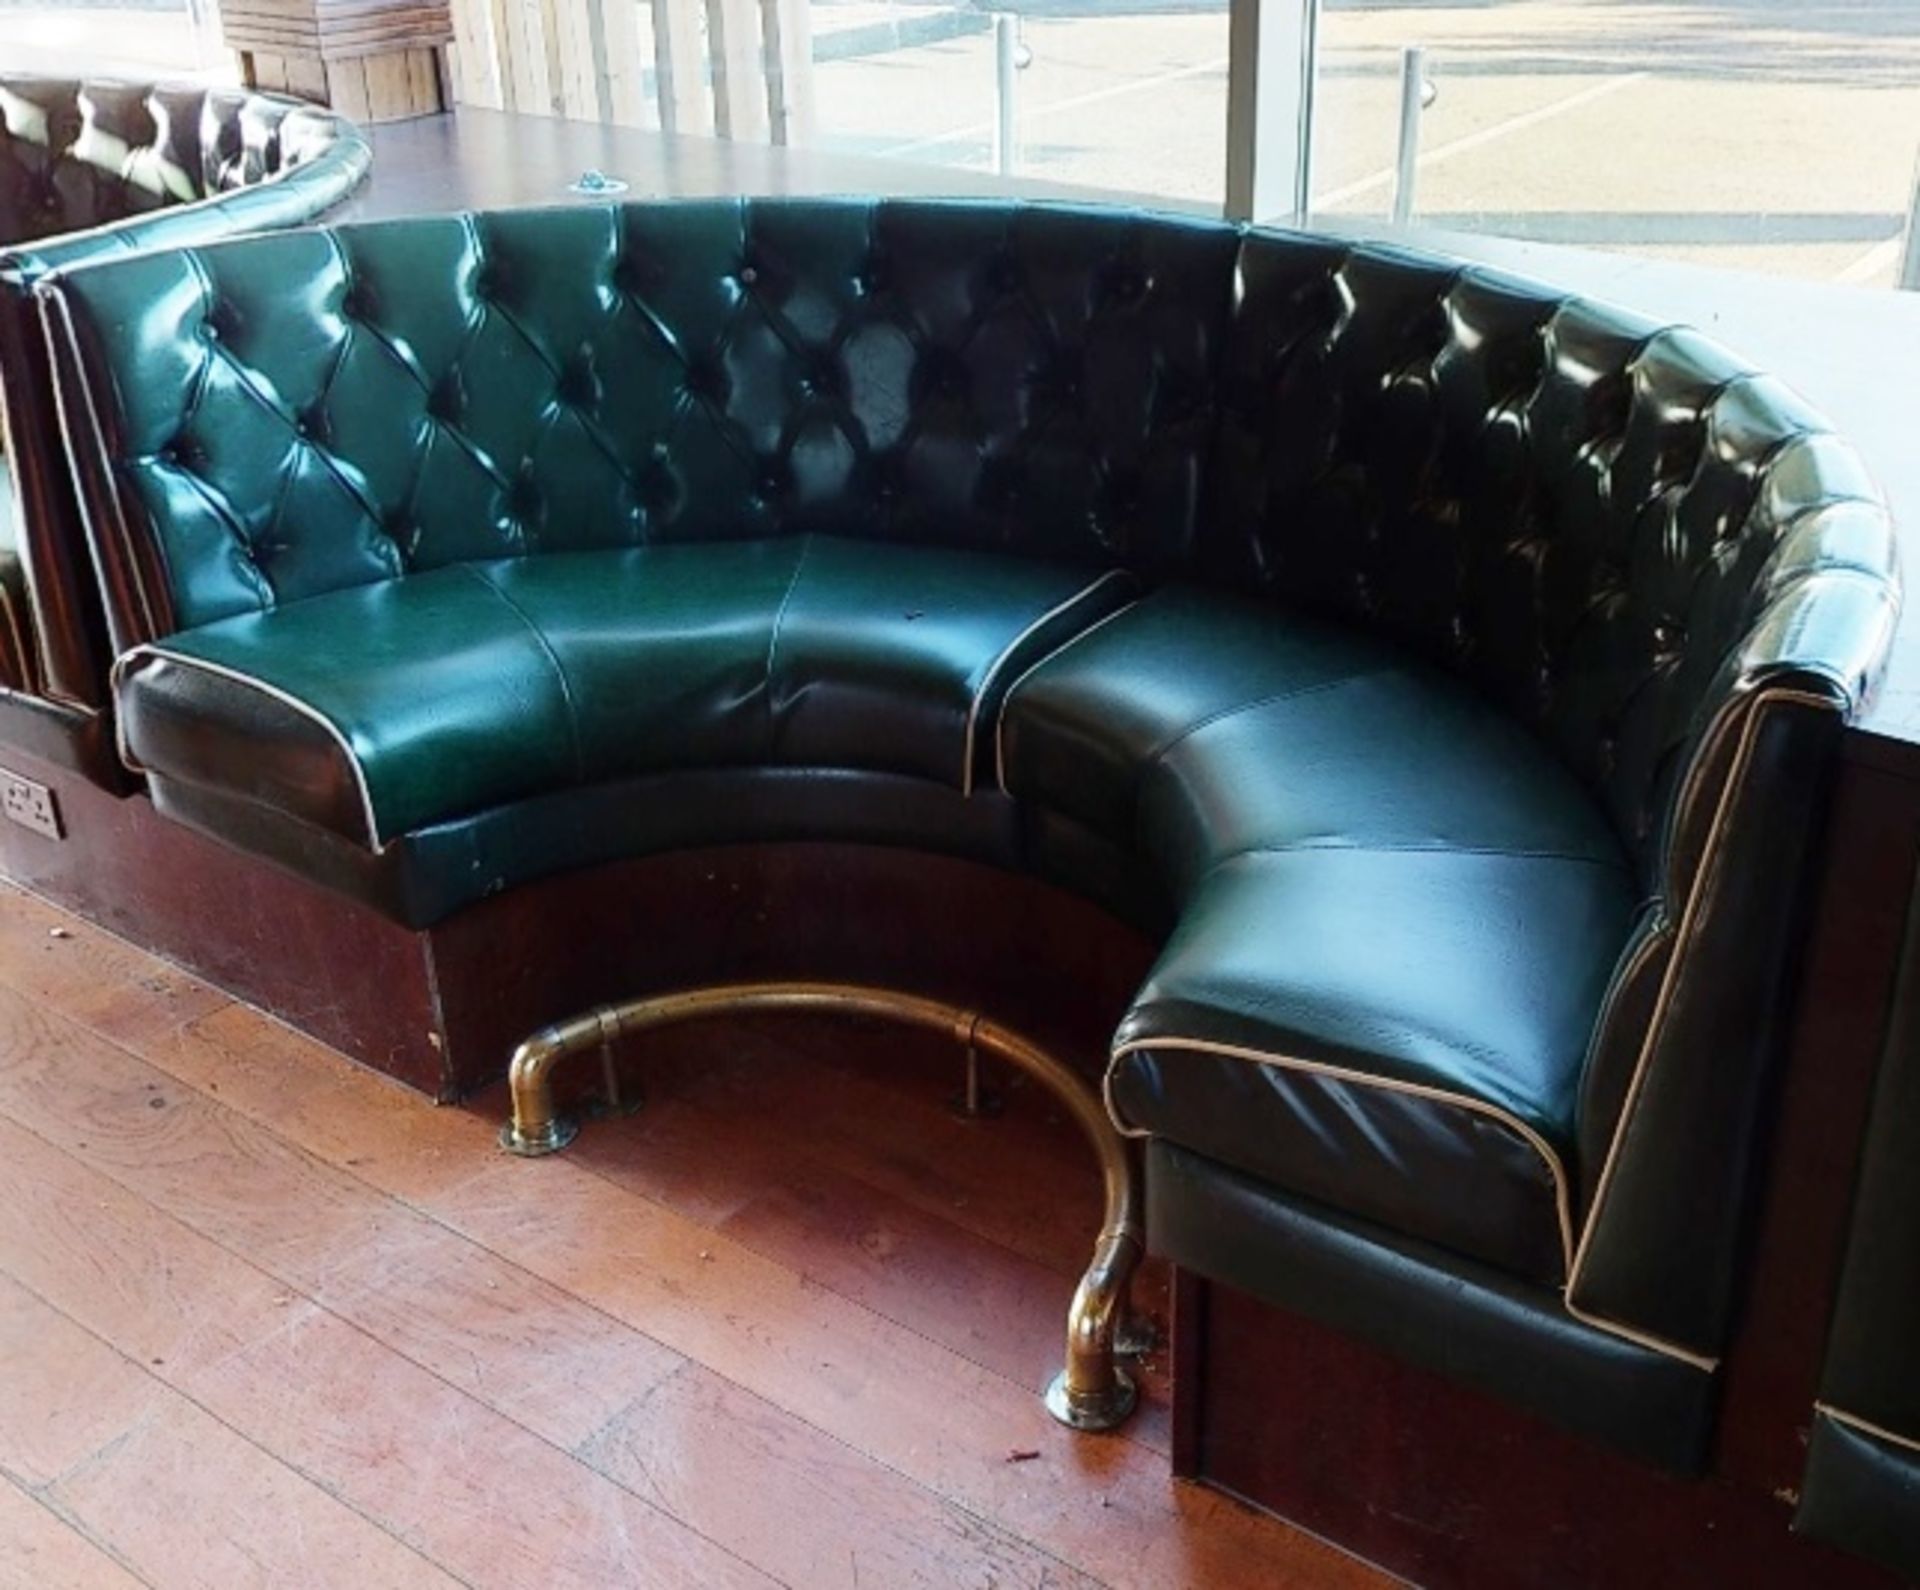 1 x Restaurant C Shaped Seating Booth With Brass Footrest - Regency Green Upholstery & Studded Backs - Image 2 of 3